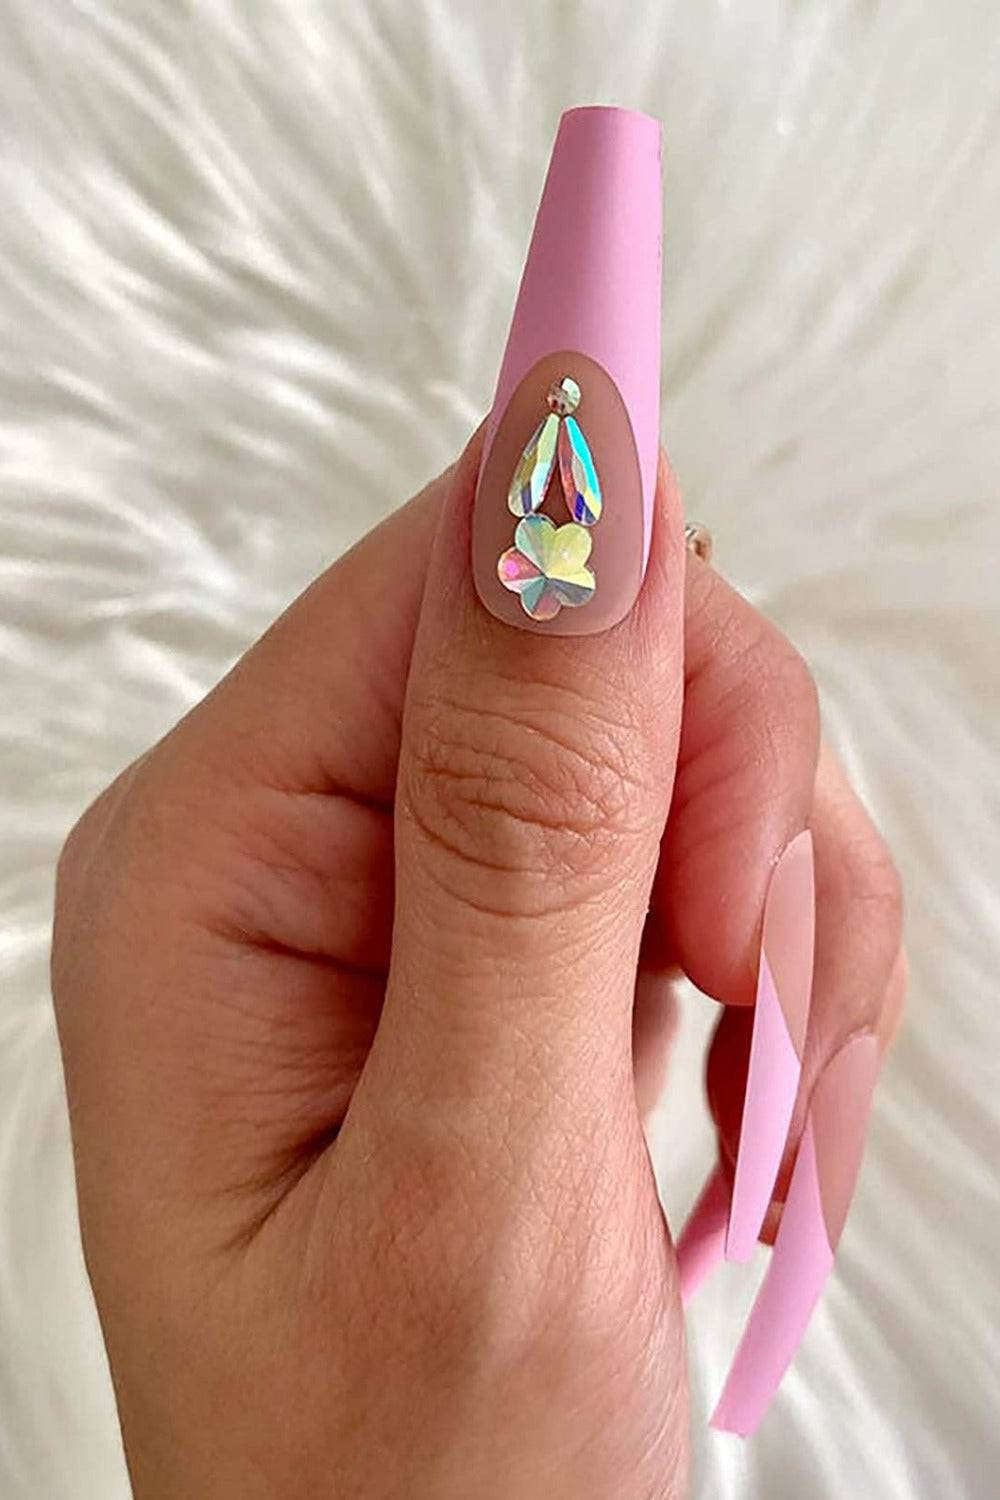 Pink And White Ballerina Nails